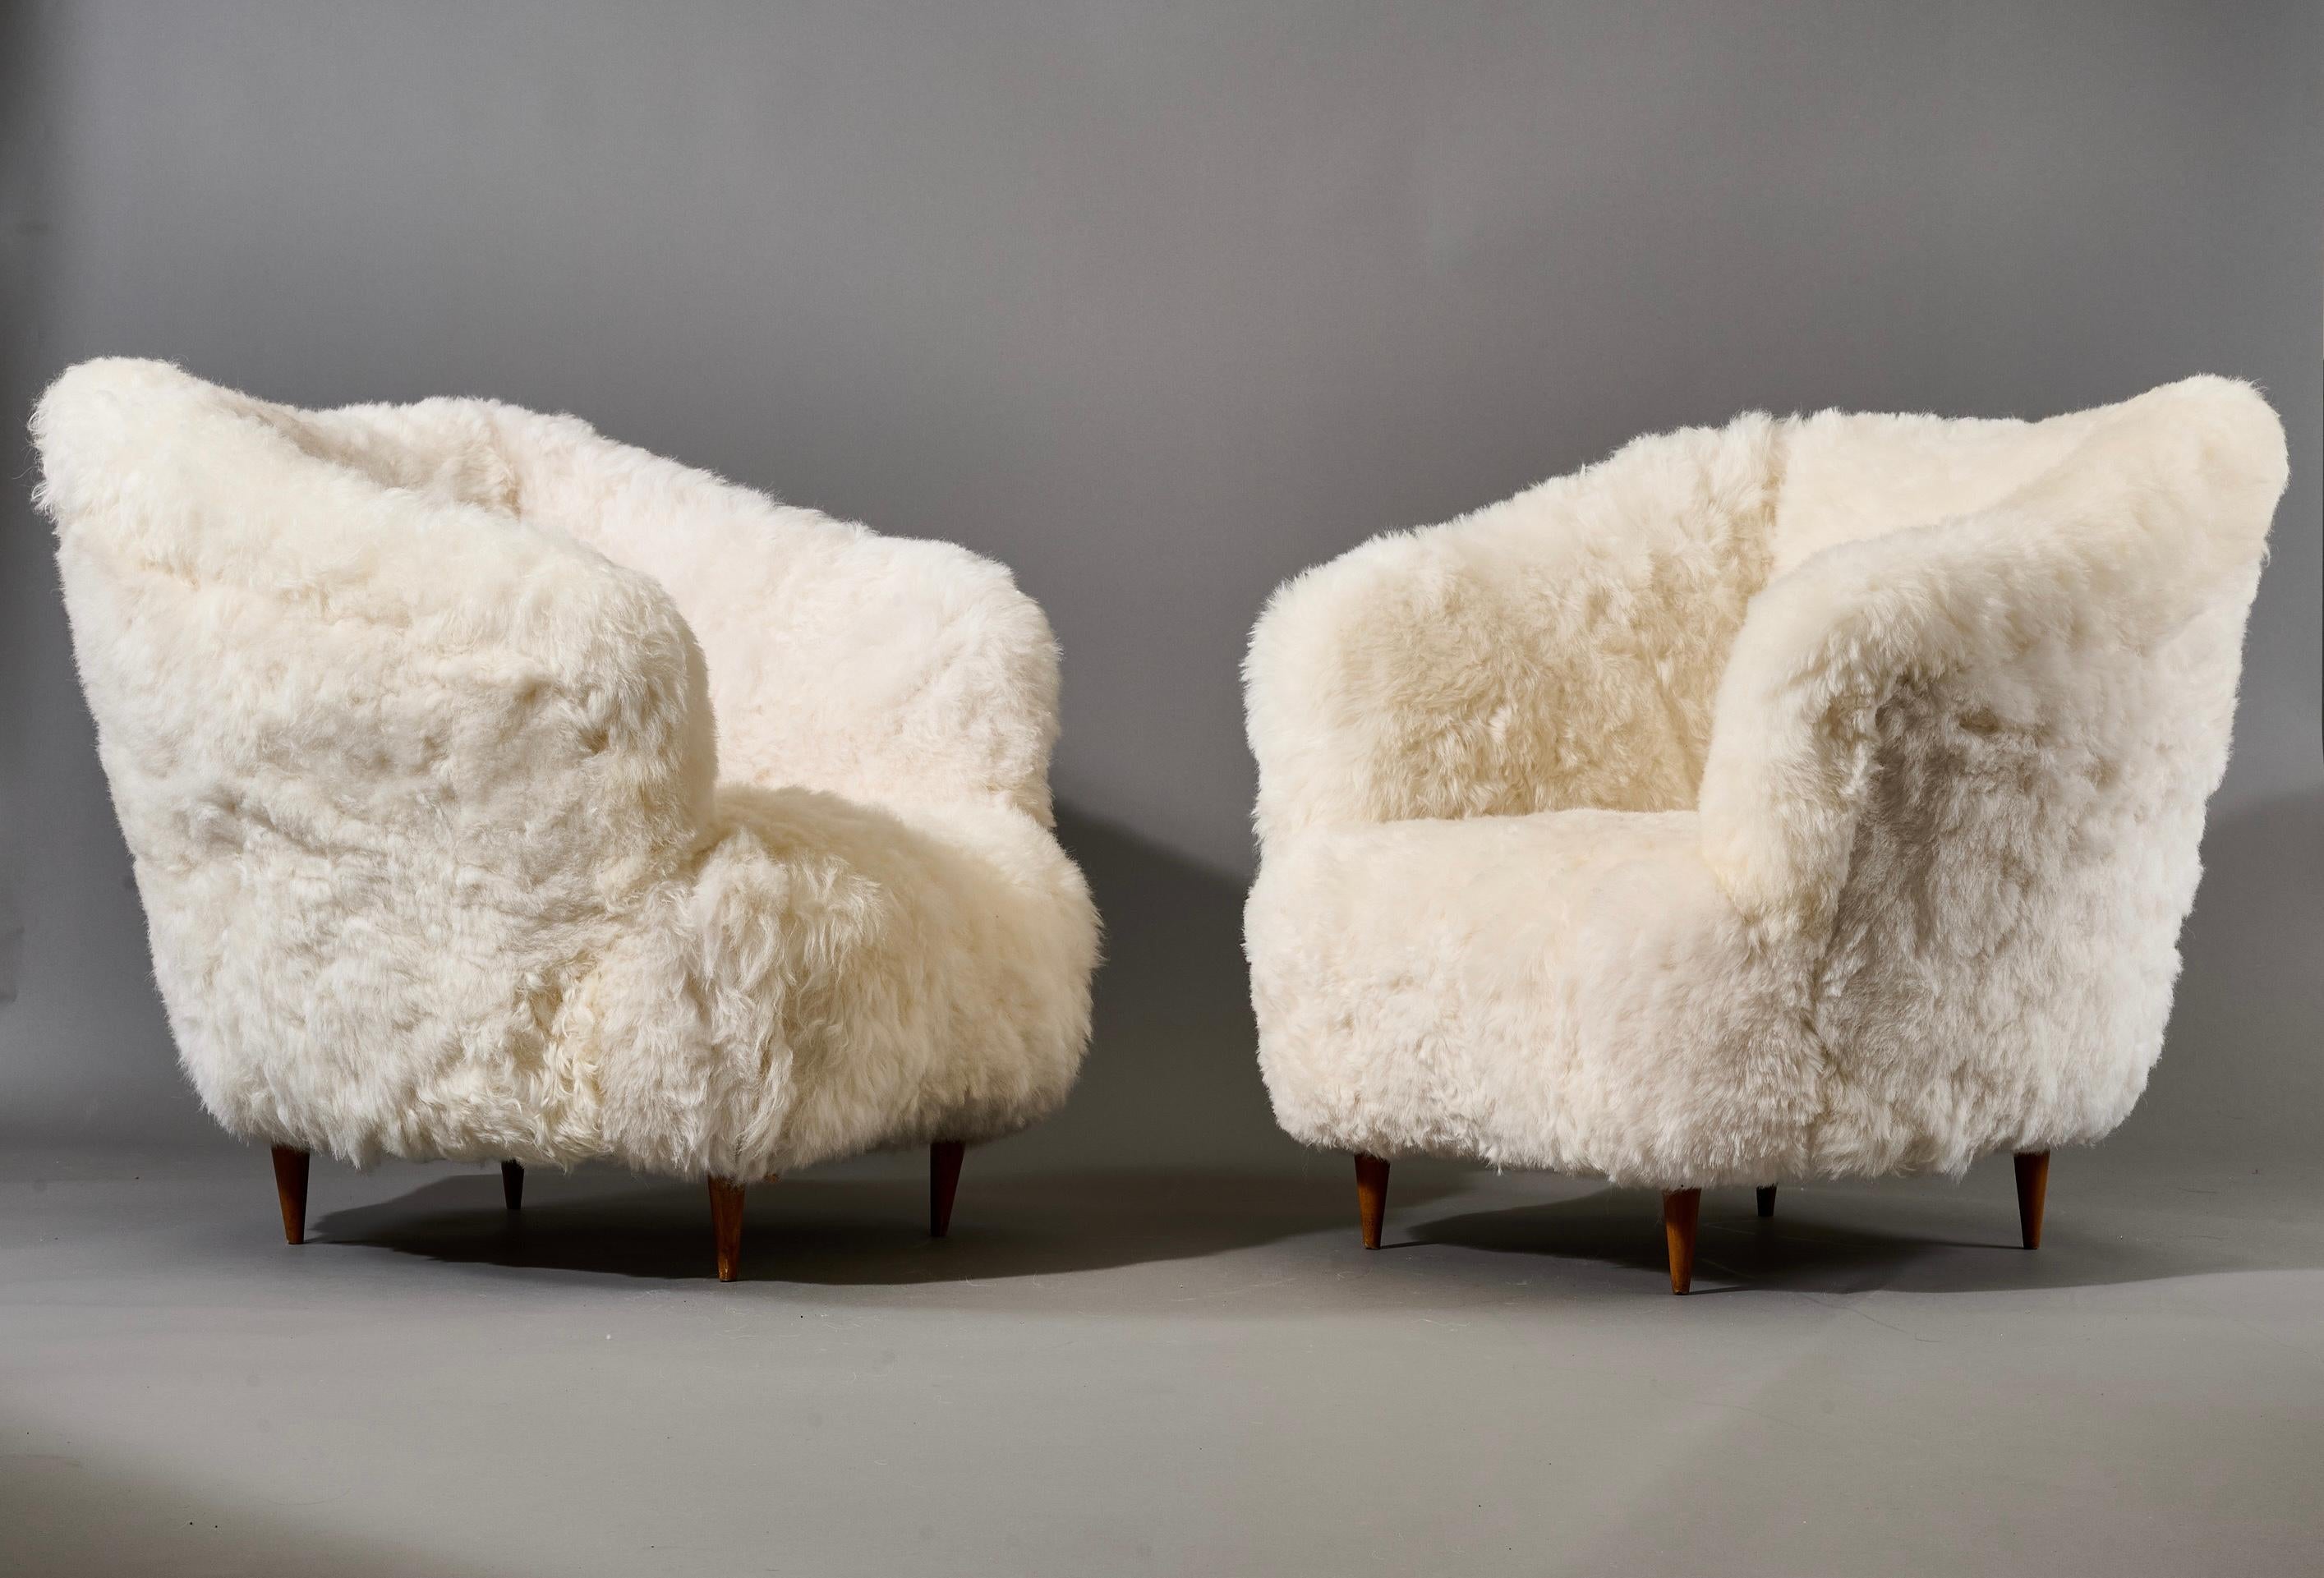 Gio Ponti: Armchairs in White Sheepskin, Italy 1950s For Sale 2